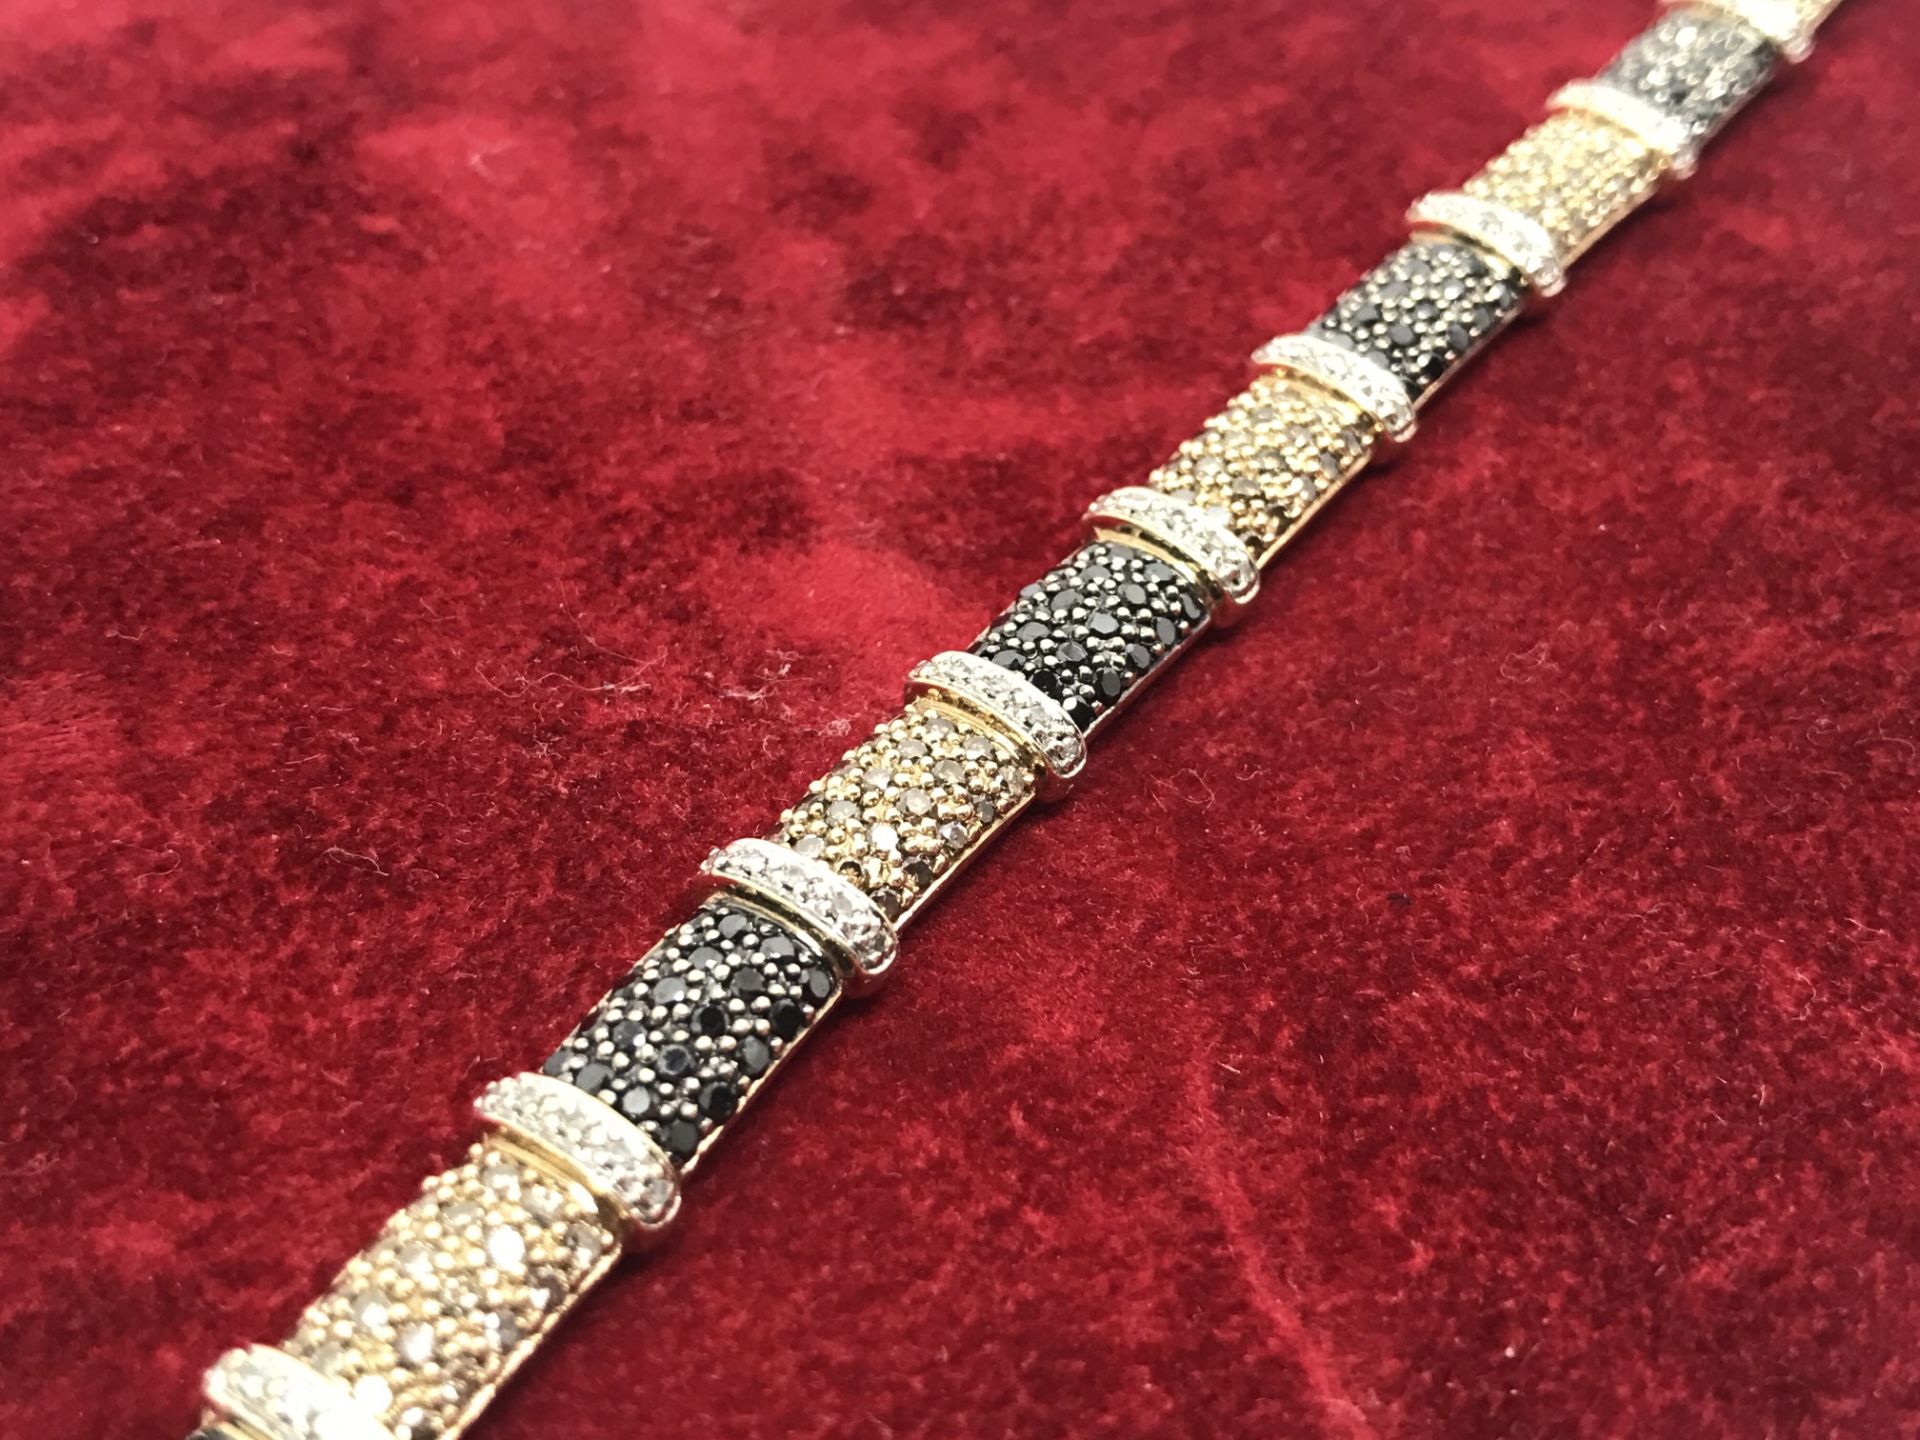 5.22ct 3 COLOUR DIAMOND BRACELET SET IN YELLOW METAL (TESTED AS 14ct GOLD) - Image 2 of 6